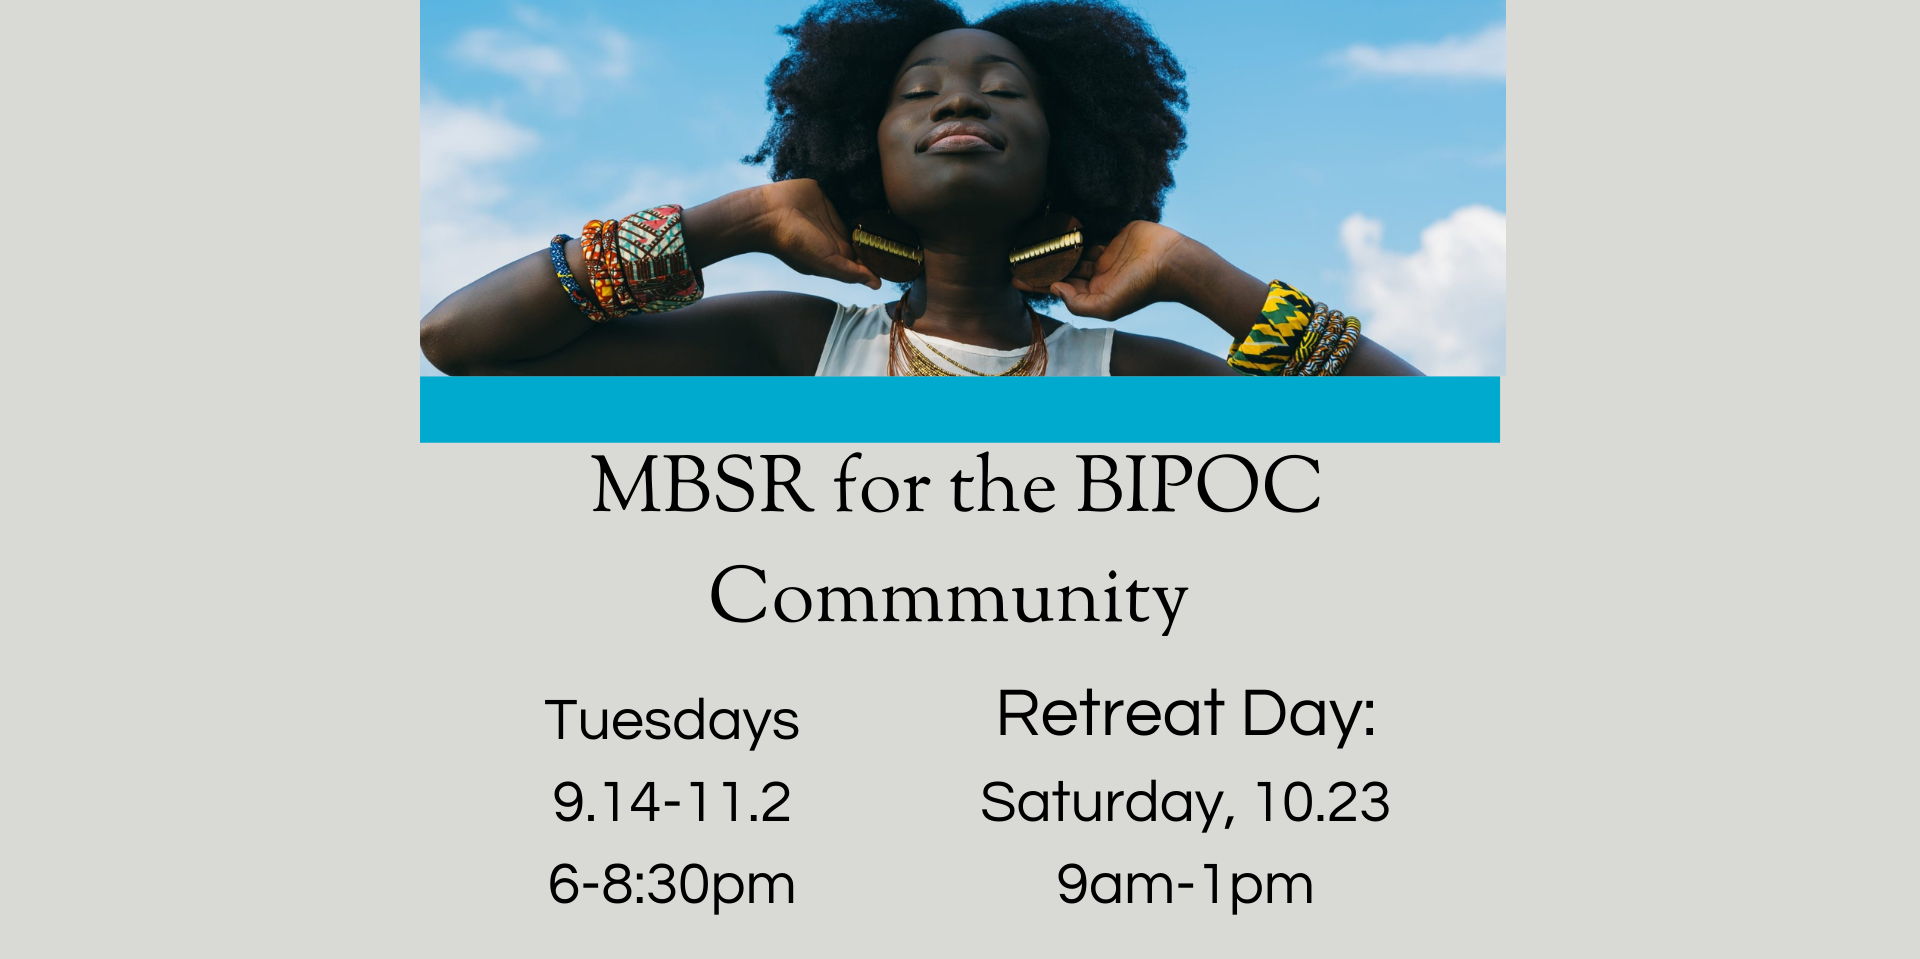 MBSR for the BIPOC Community promotional image